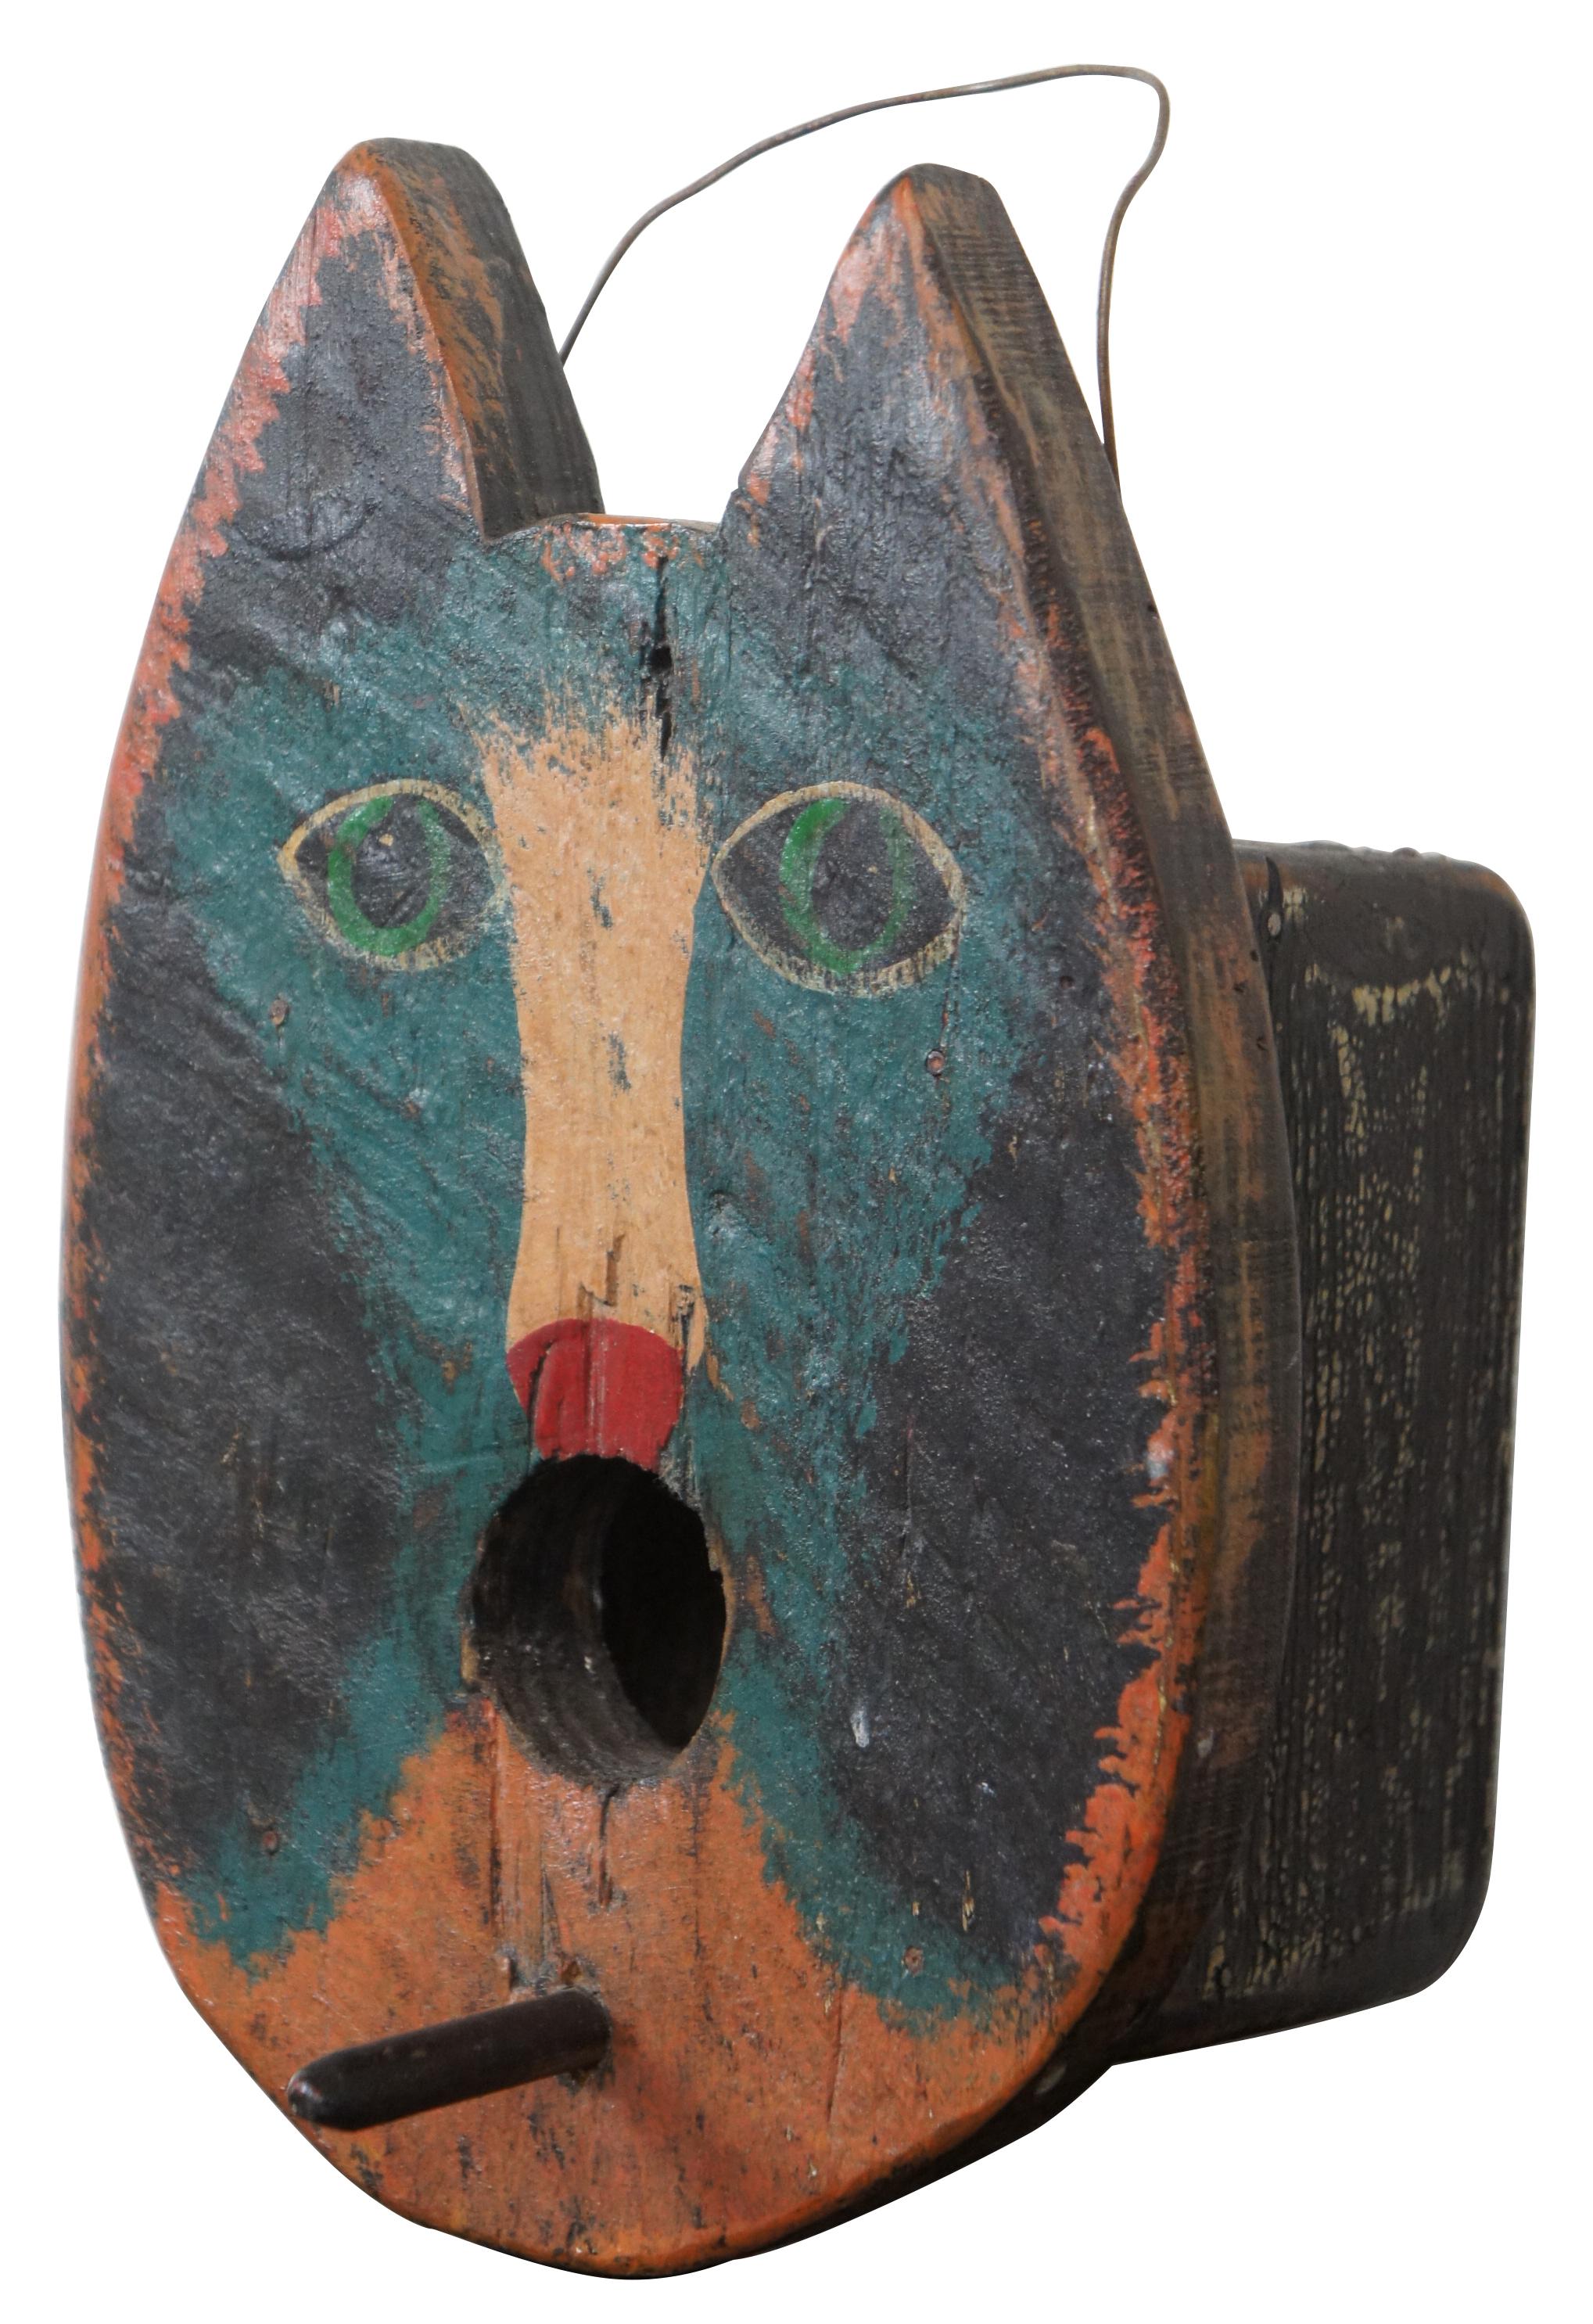 Handmade antique Folk Art painted wooden birdhouse shaped like a blue, white and black cat’s face. Measure: 7